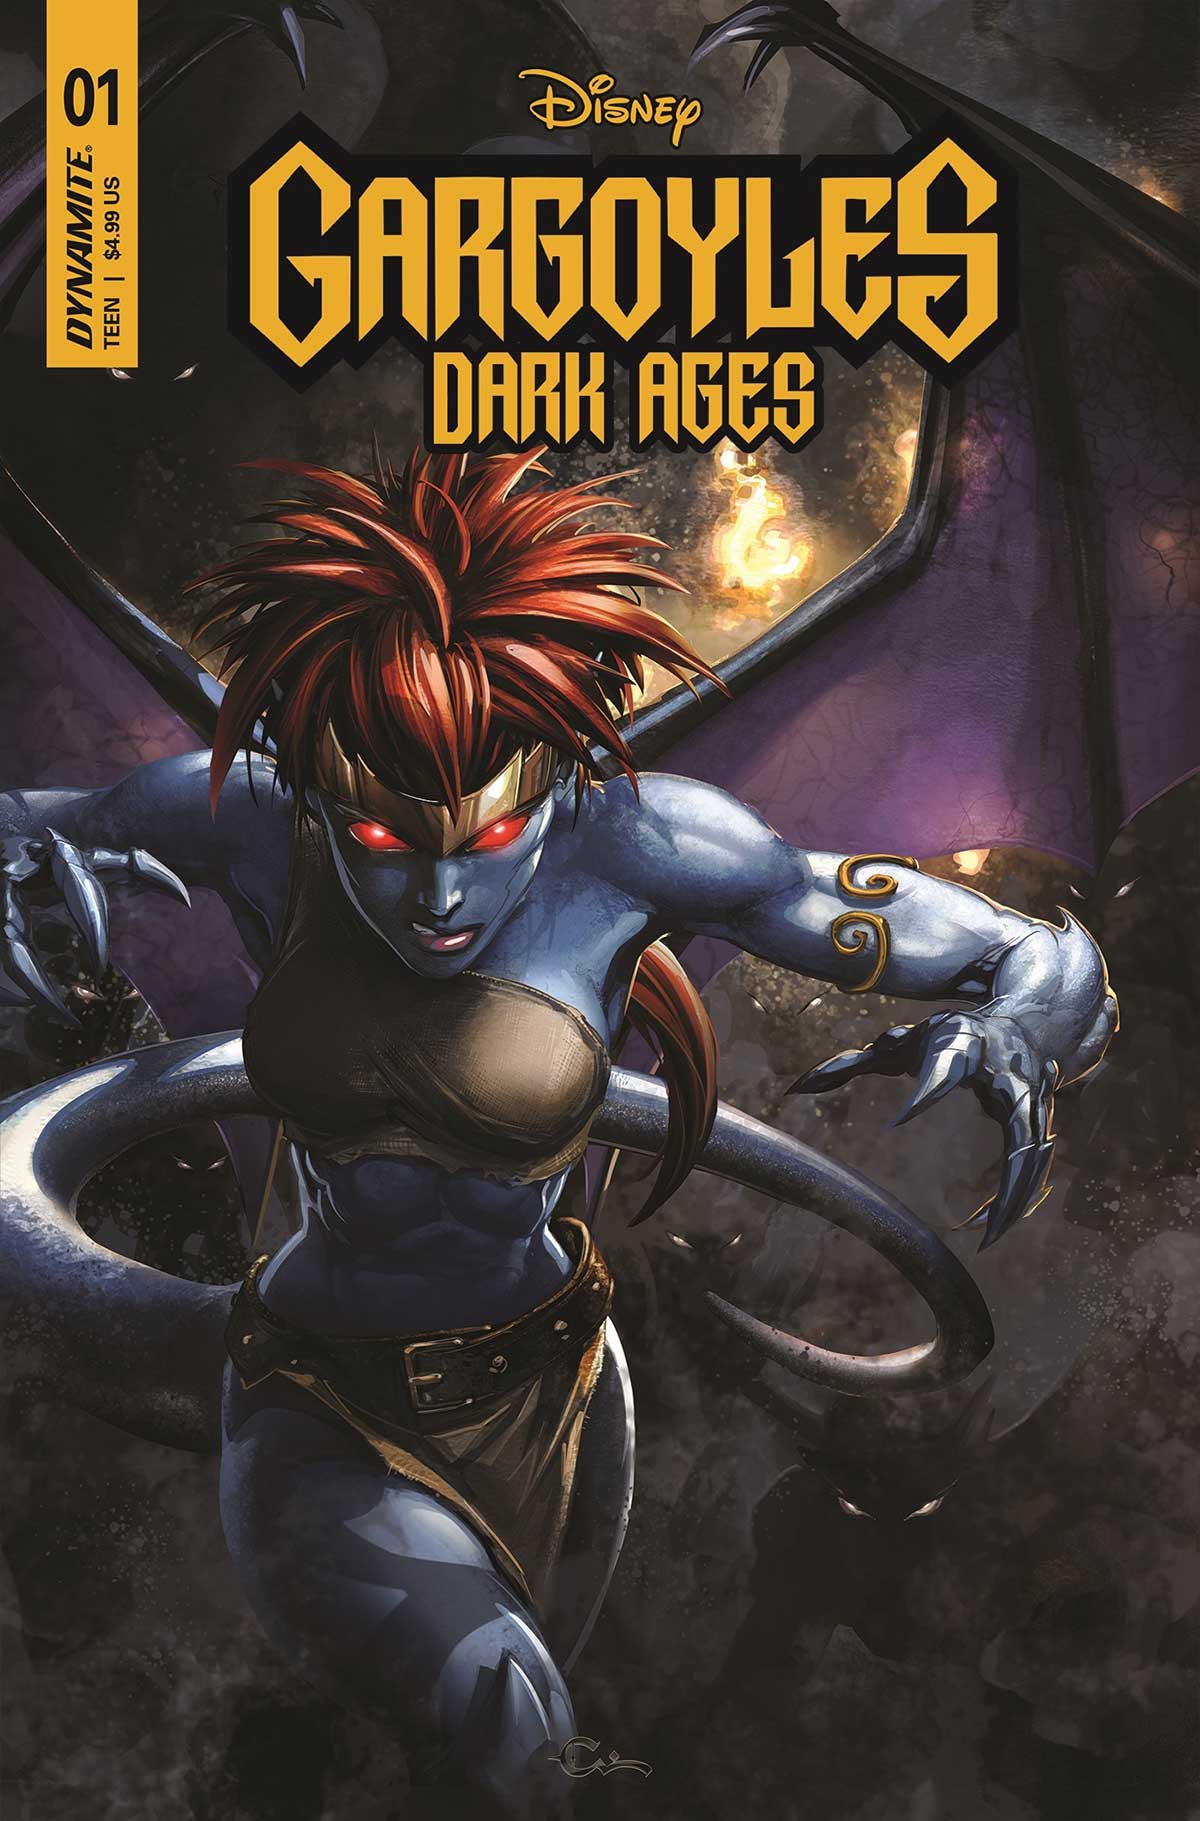 Age of Darkness #1: Comic Book Review